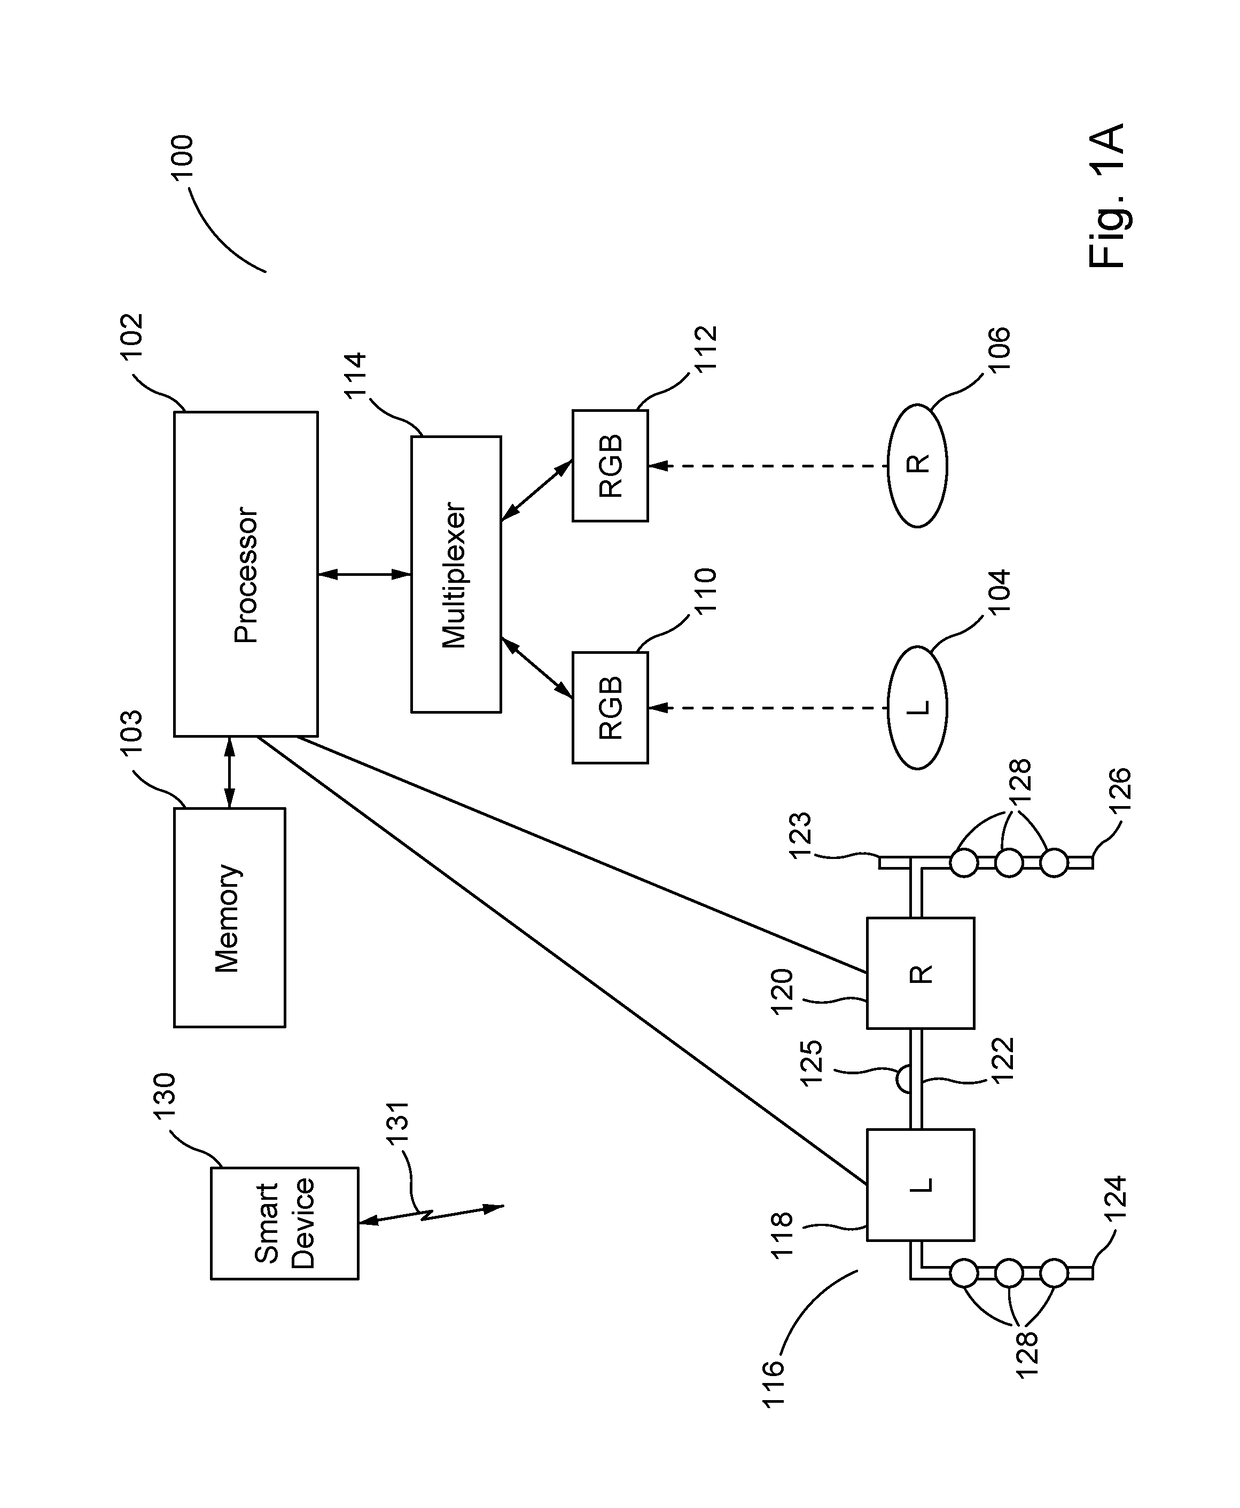 System and device for promoting eye alignment